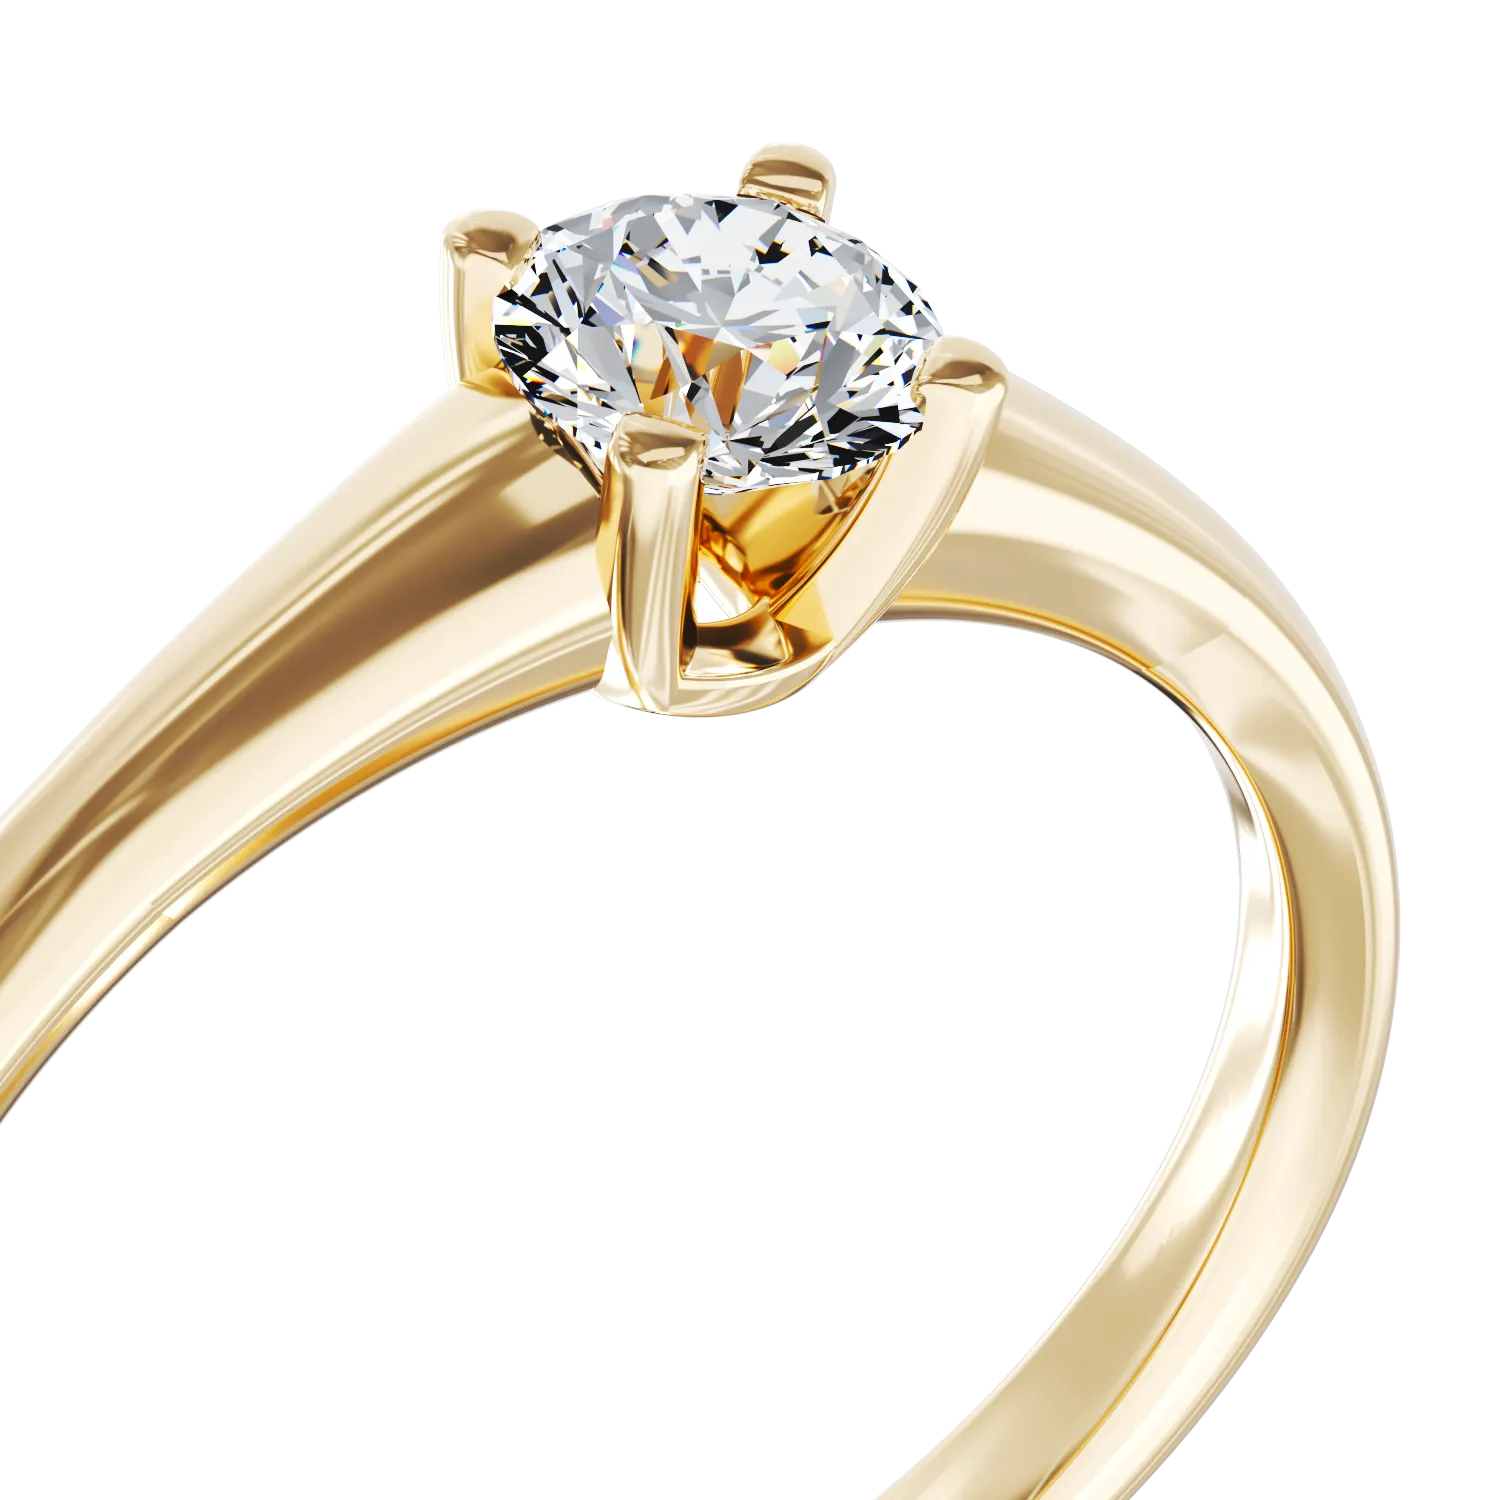 18K yellow gold engagement ring with a 0.31ct solitaire diamond